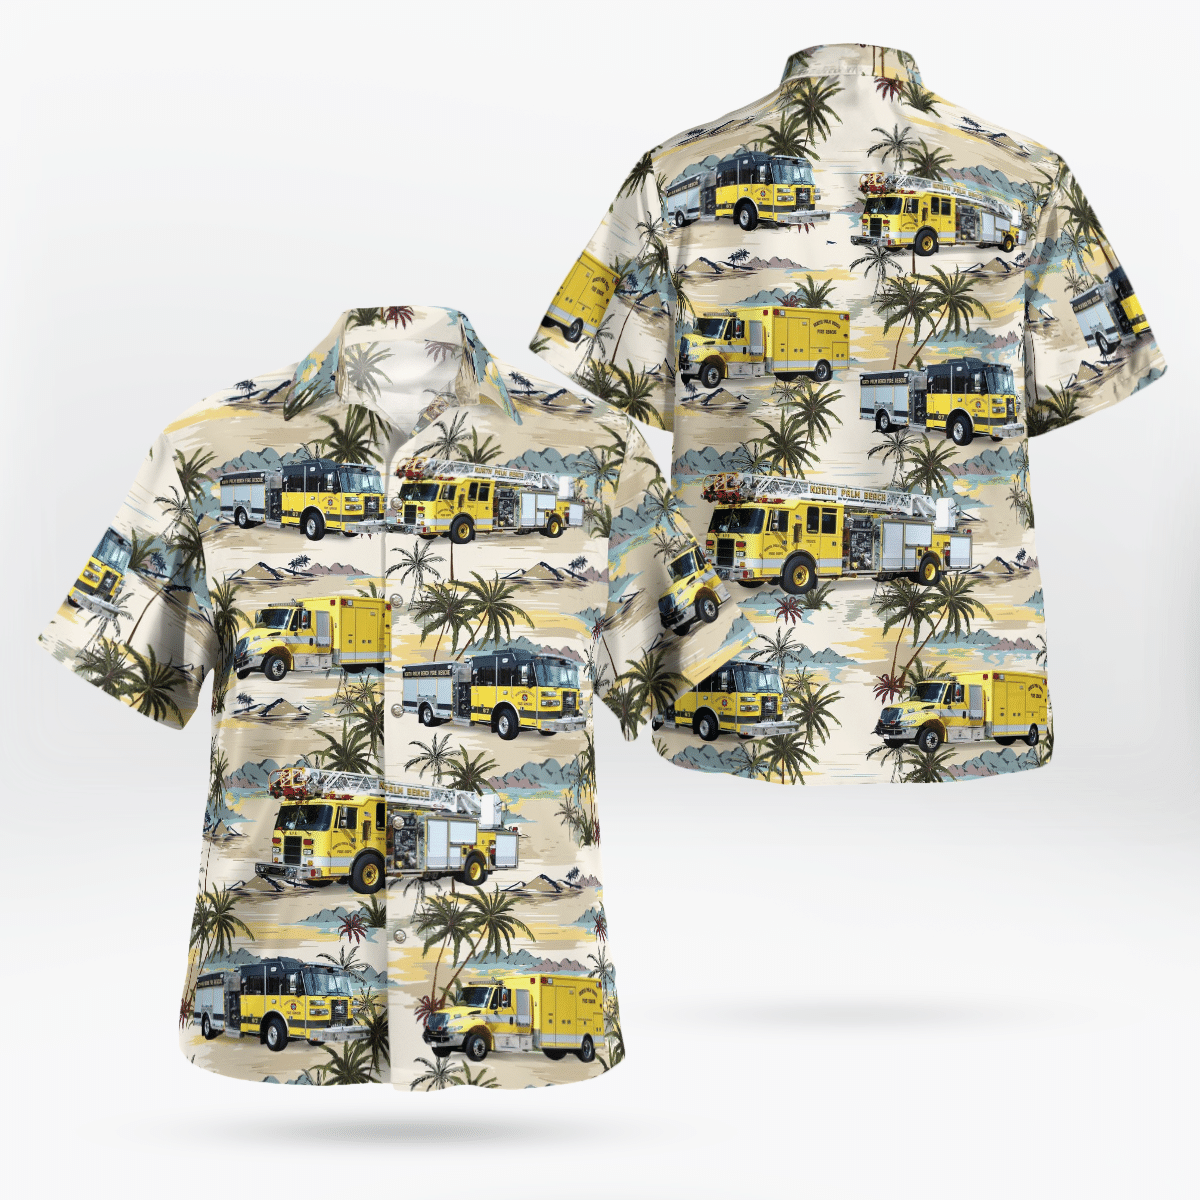 If You Are In The Market For A New Aloha Shirt, Look No Further Than Our Store Word1